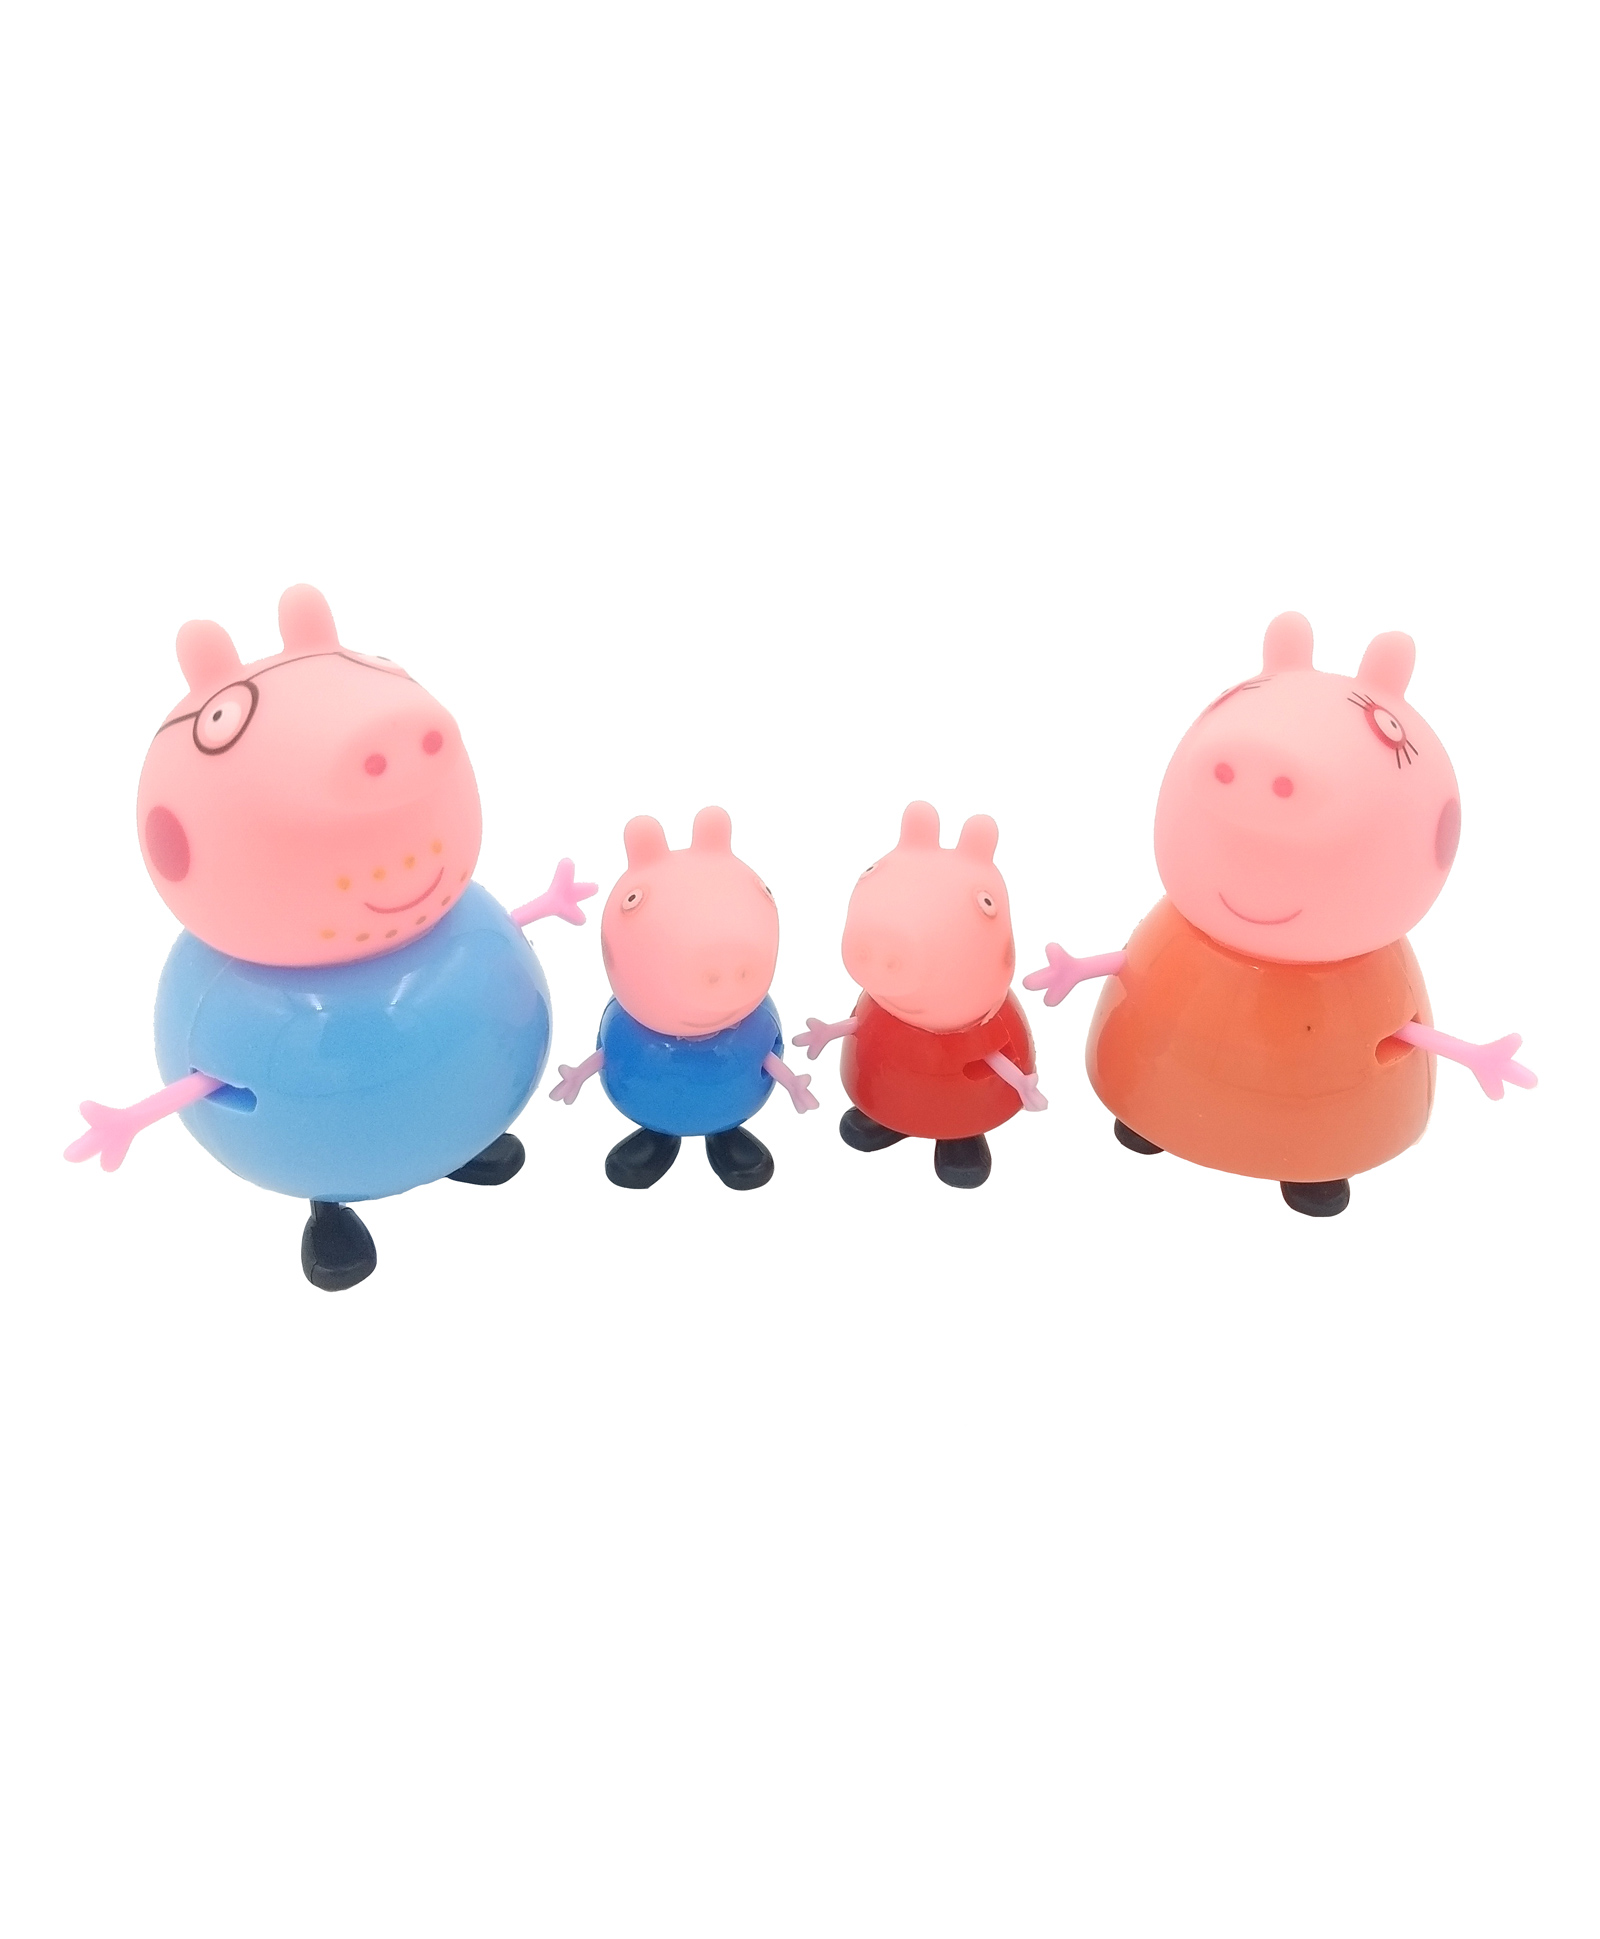 VGRASSP Peppa Pig Toys Family Set of 4 - Multicolour Online India, Buy  Figures & Playsets for (3-6 Years) at  - 10737165